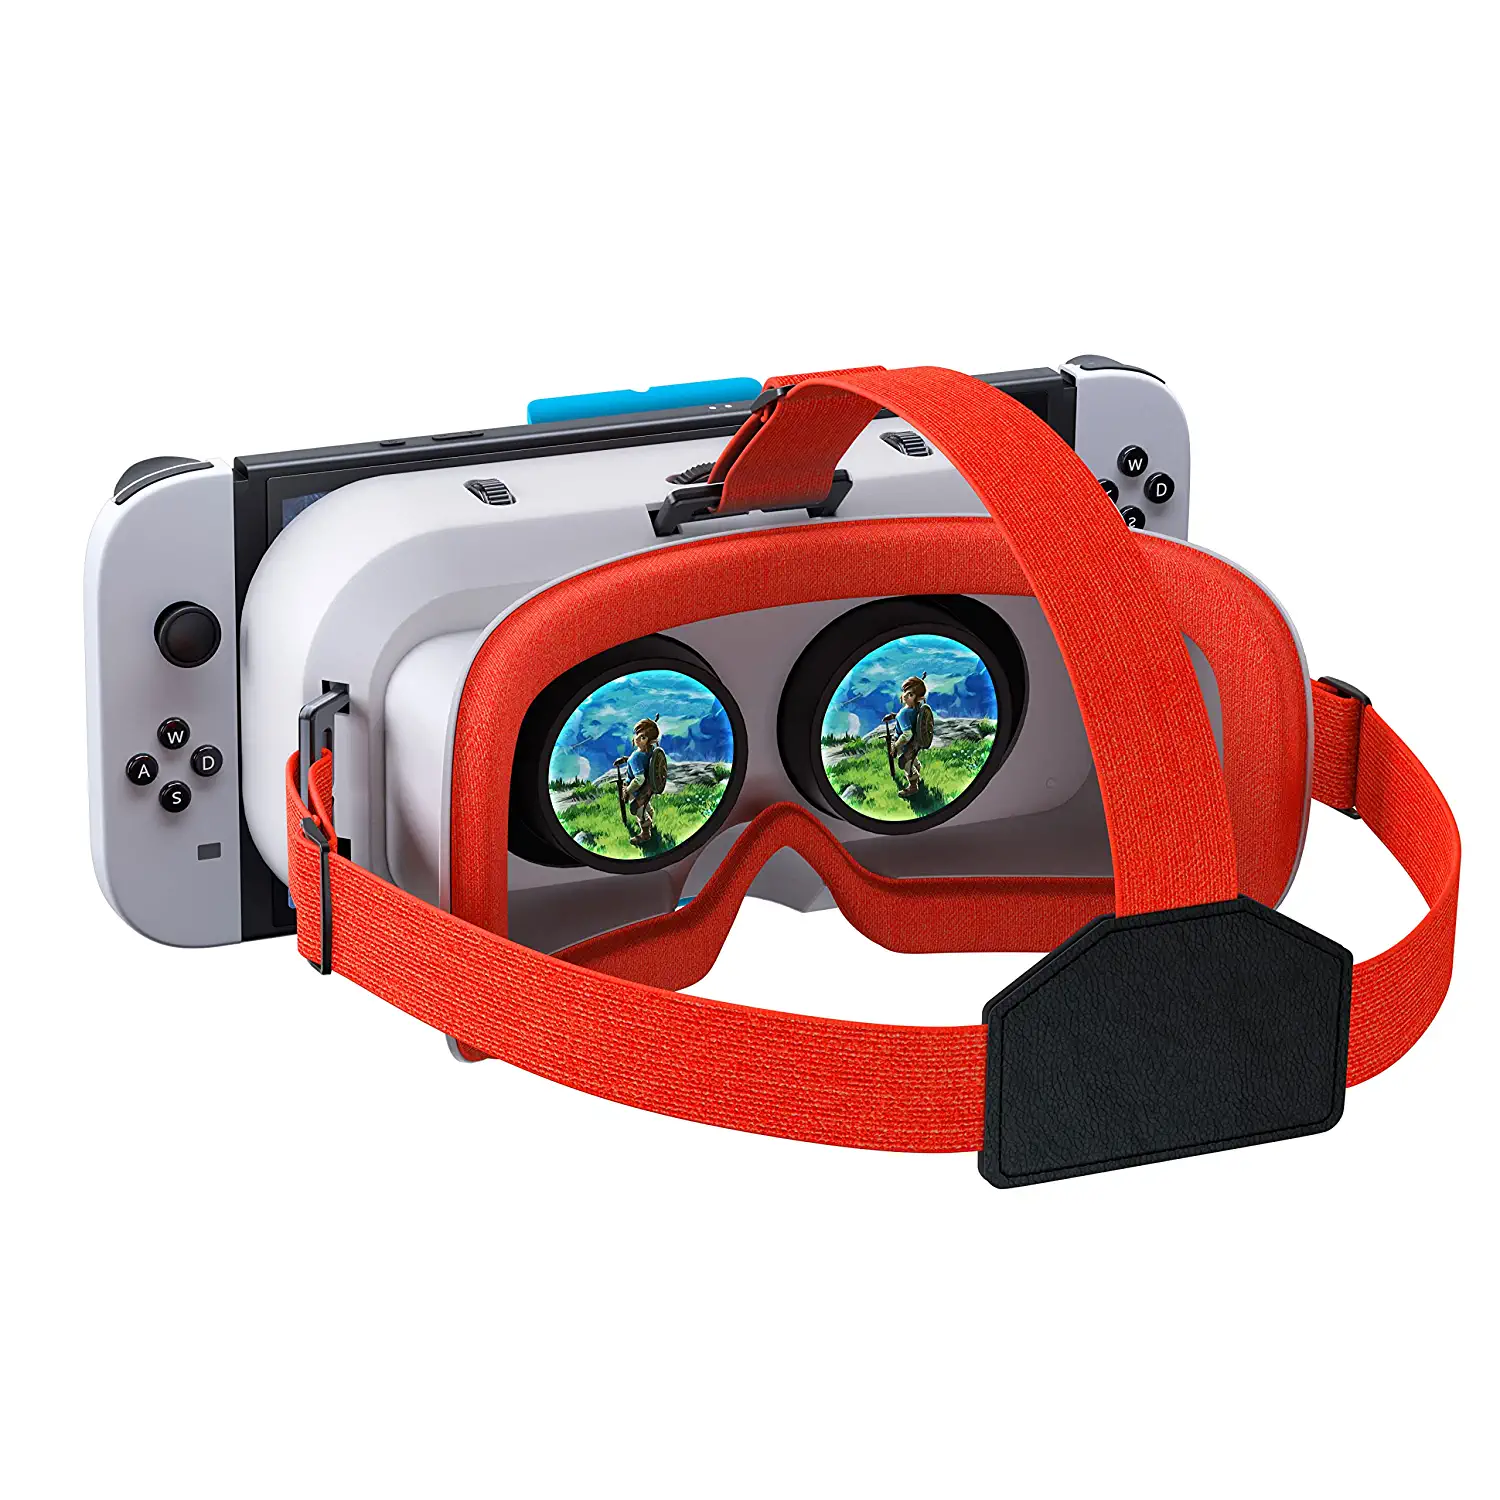 Vr Headset For Nintendo Switch Oled Model/Nintendo Switch 3D Vr (Virtual Reality